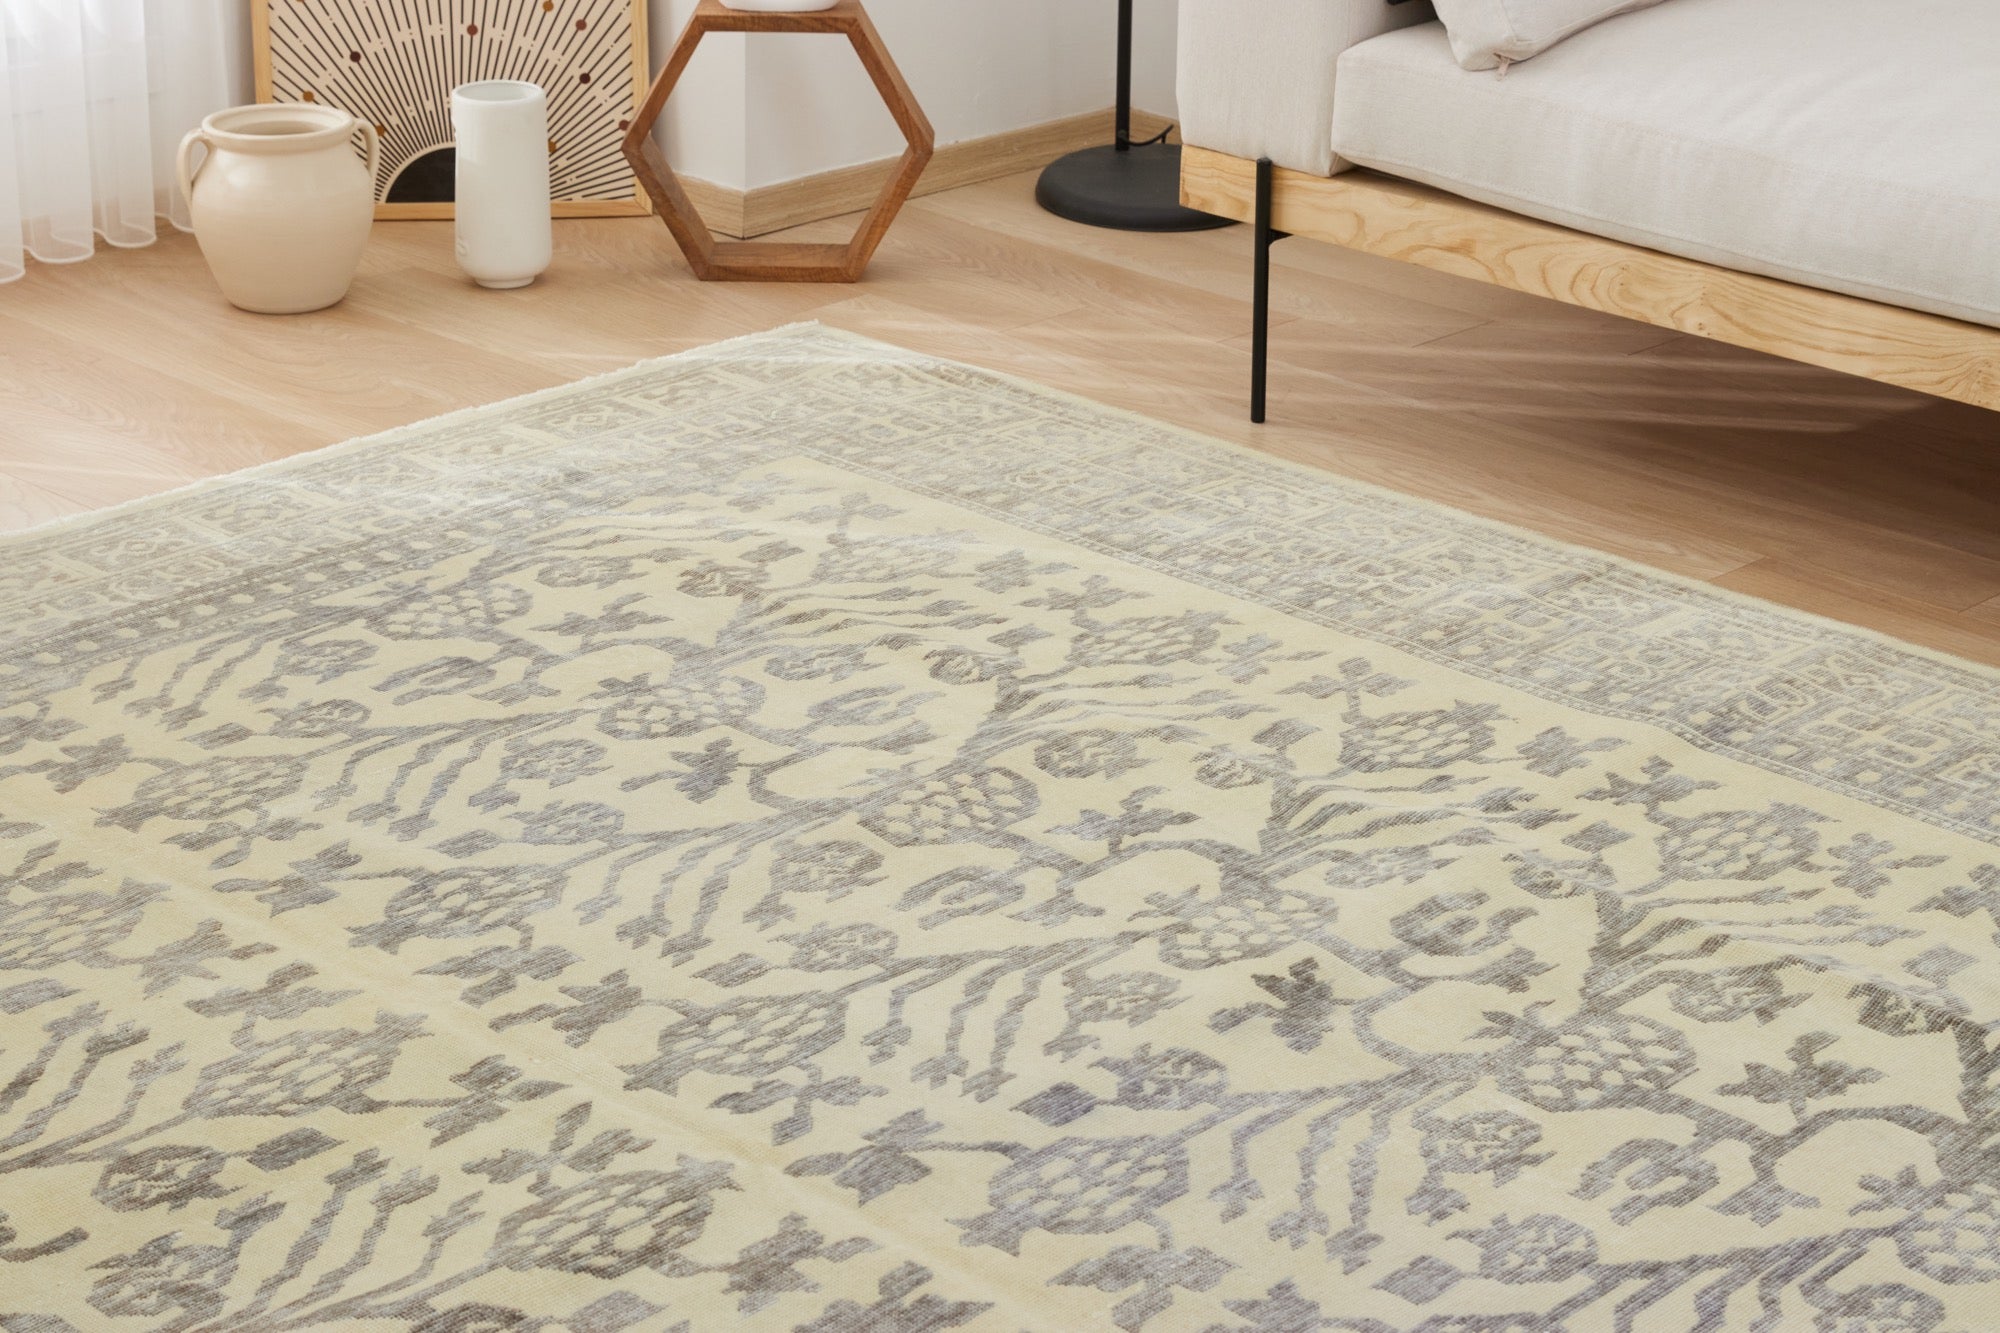 Chandra | Luxurious Wool and Cotton Blend in a Unique Turkish Carpet | Kuden Rugs